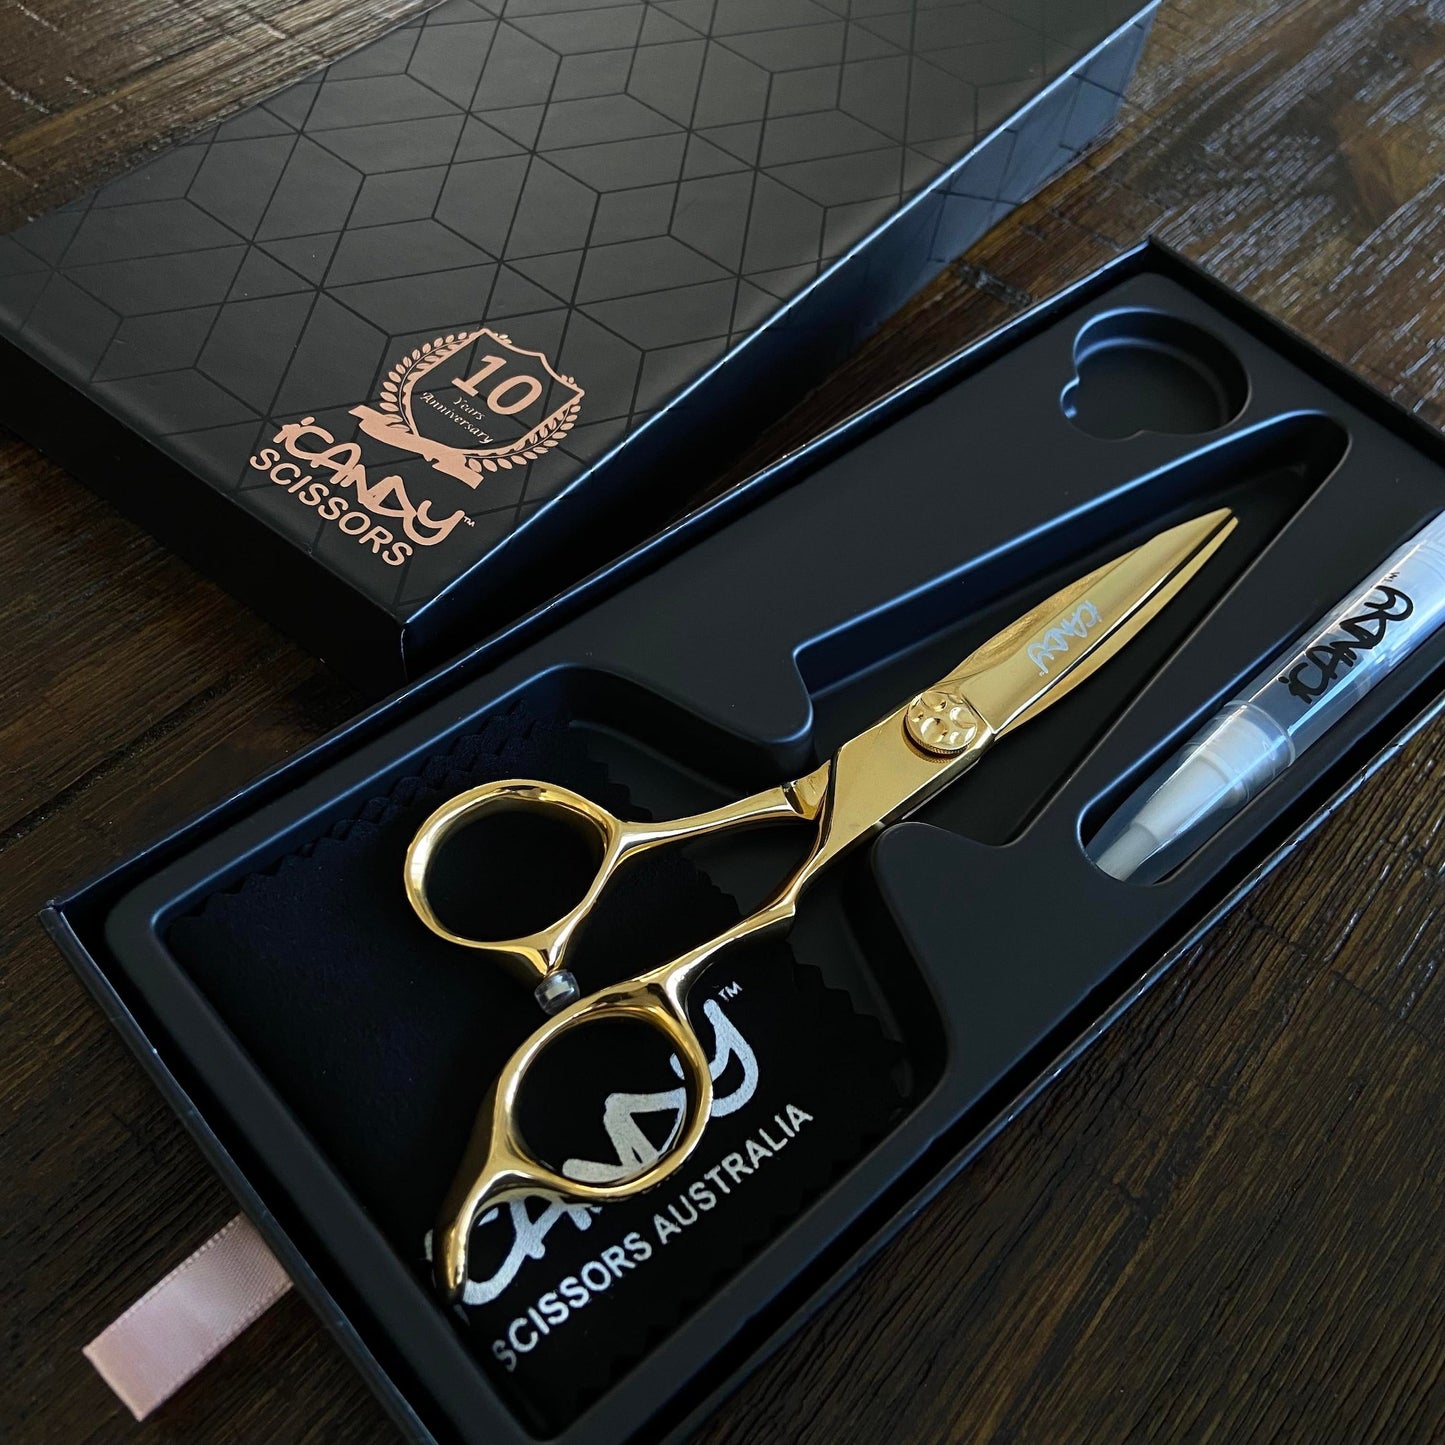 iCandy Sword Yellow Gold VG10 6.1" 10 Years Anniversary Edition Scissors Open Box